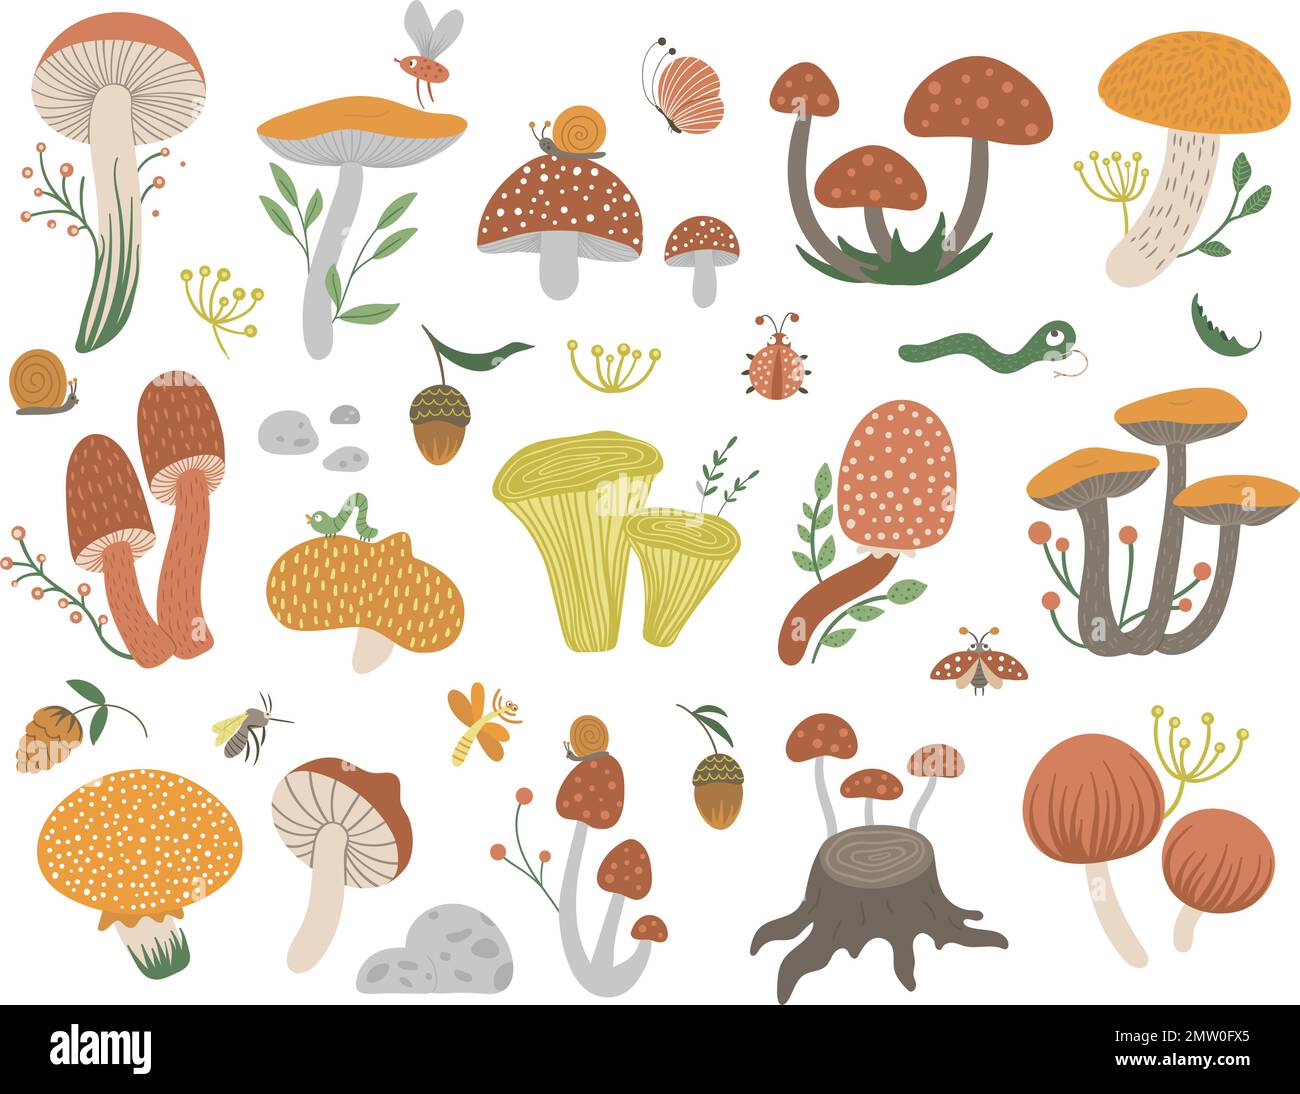 Vector set of flat funny mushrooms with berries, leaves and insects. Autumn clip art for children’s design. Cute fungi illustration with acorns and co Stock Vector